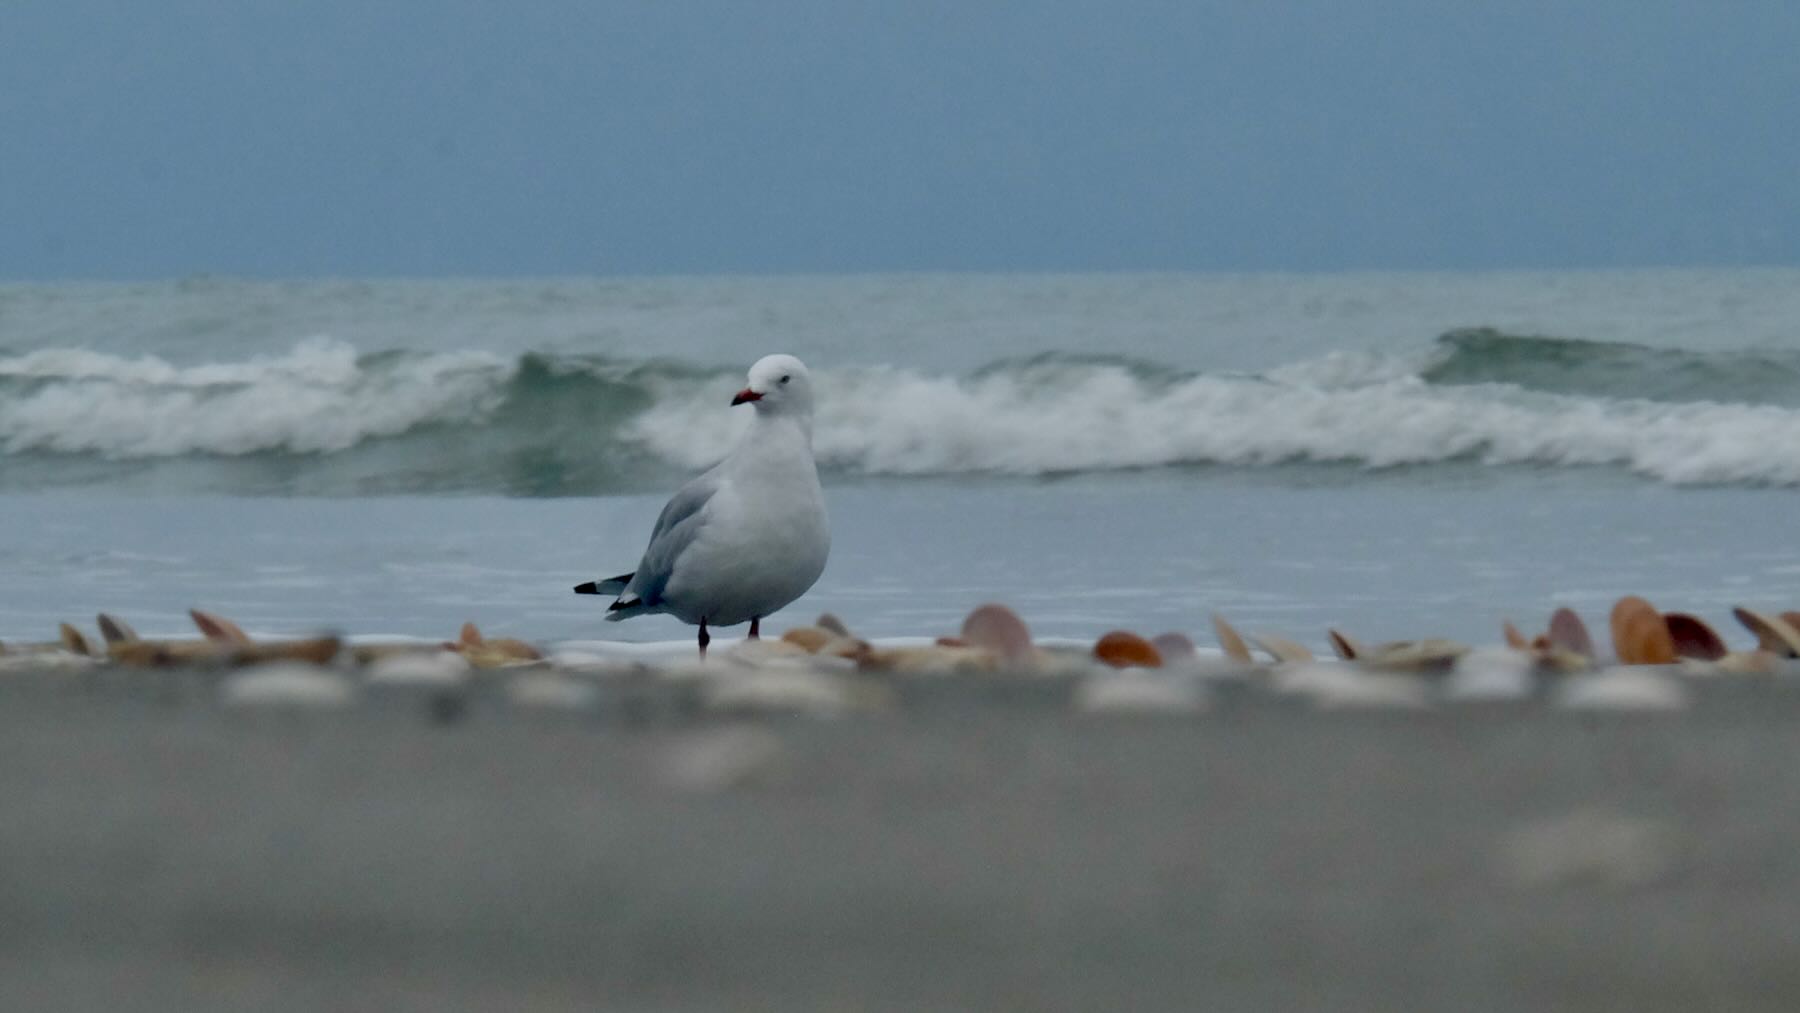 White and grey bird with red bill near opened shells and by the water edge. 